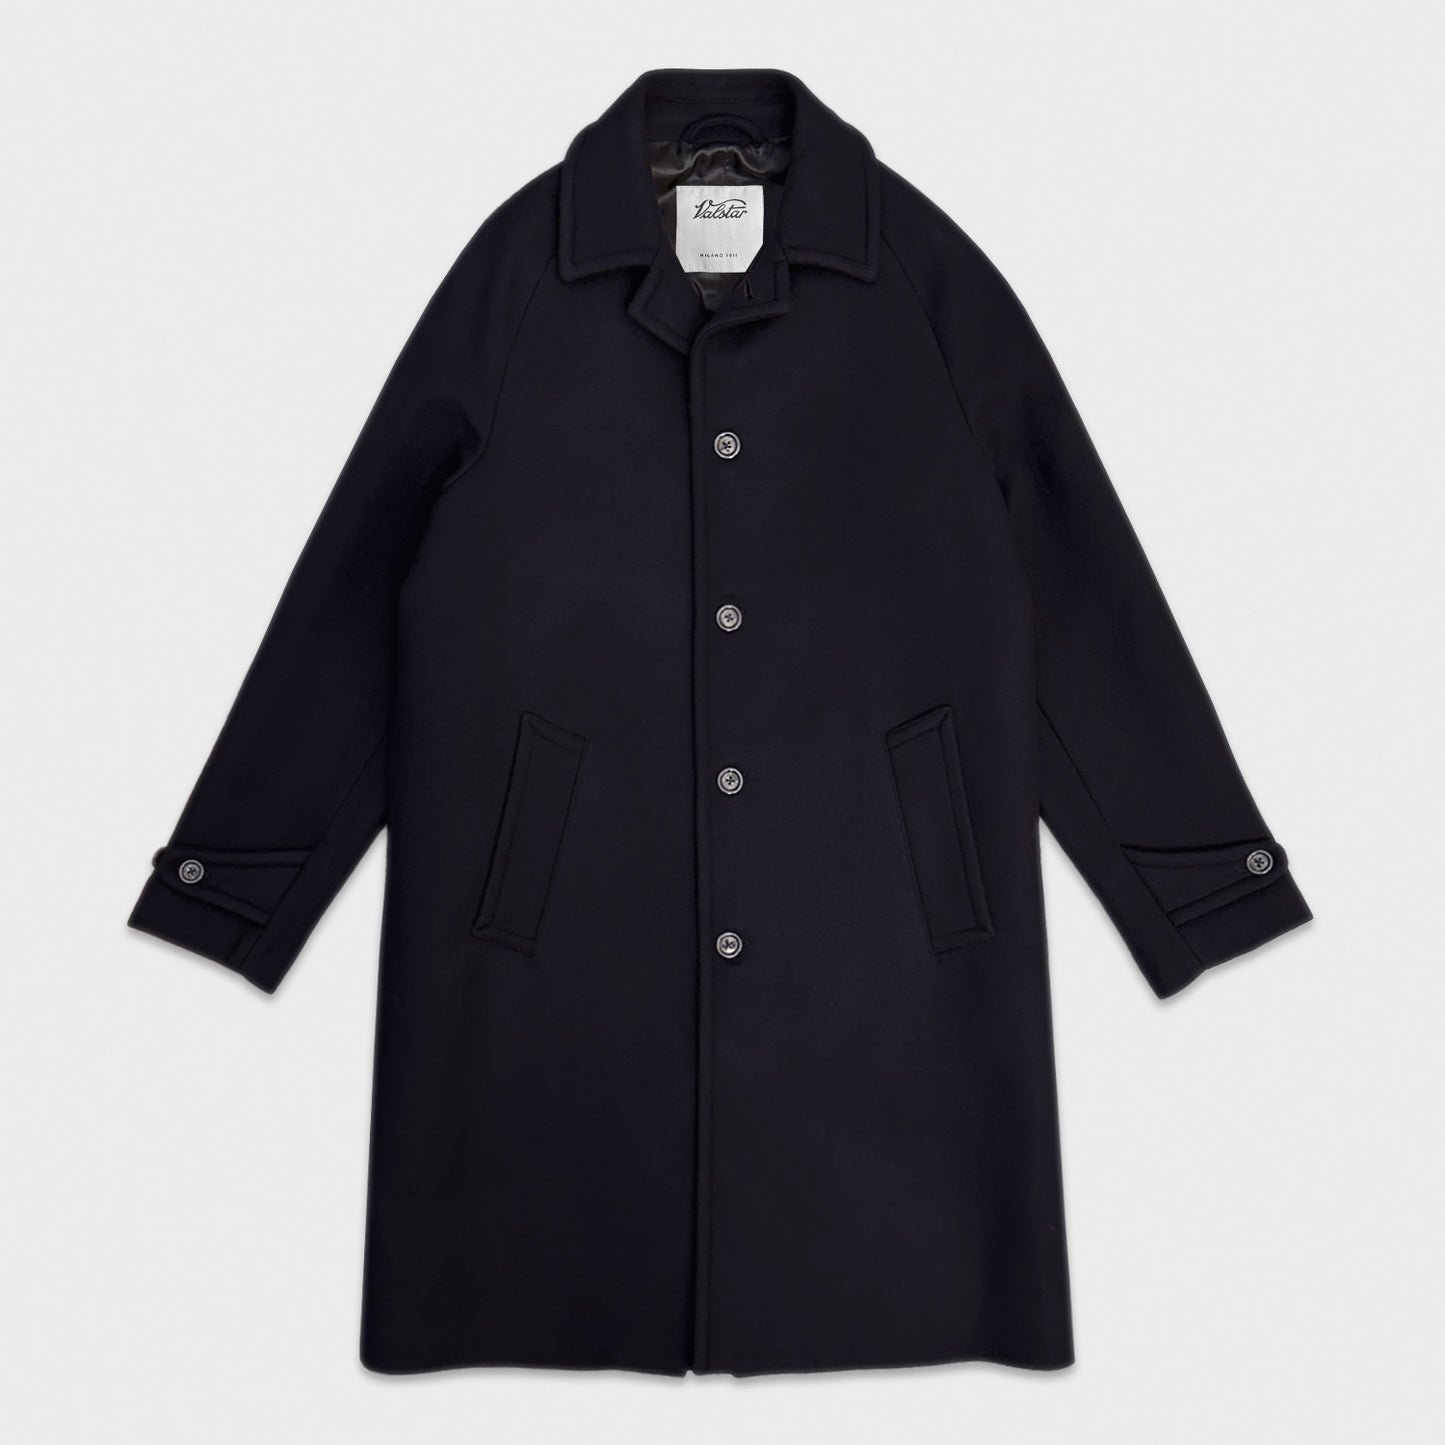 Navy Blue Raglan Sleeve Coat Virgin Wool Valstar. Valstar raglan sleeve coat blue color made with soft virgin wool, comfortable fit raglan sleeves, lined inside, soft and warm. Ideal for lovers of classic men's outerwear, an refined men's wool blend coat.